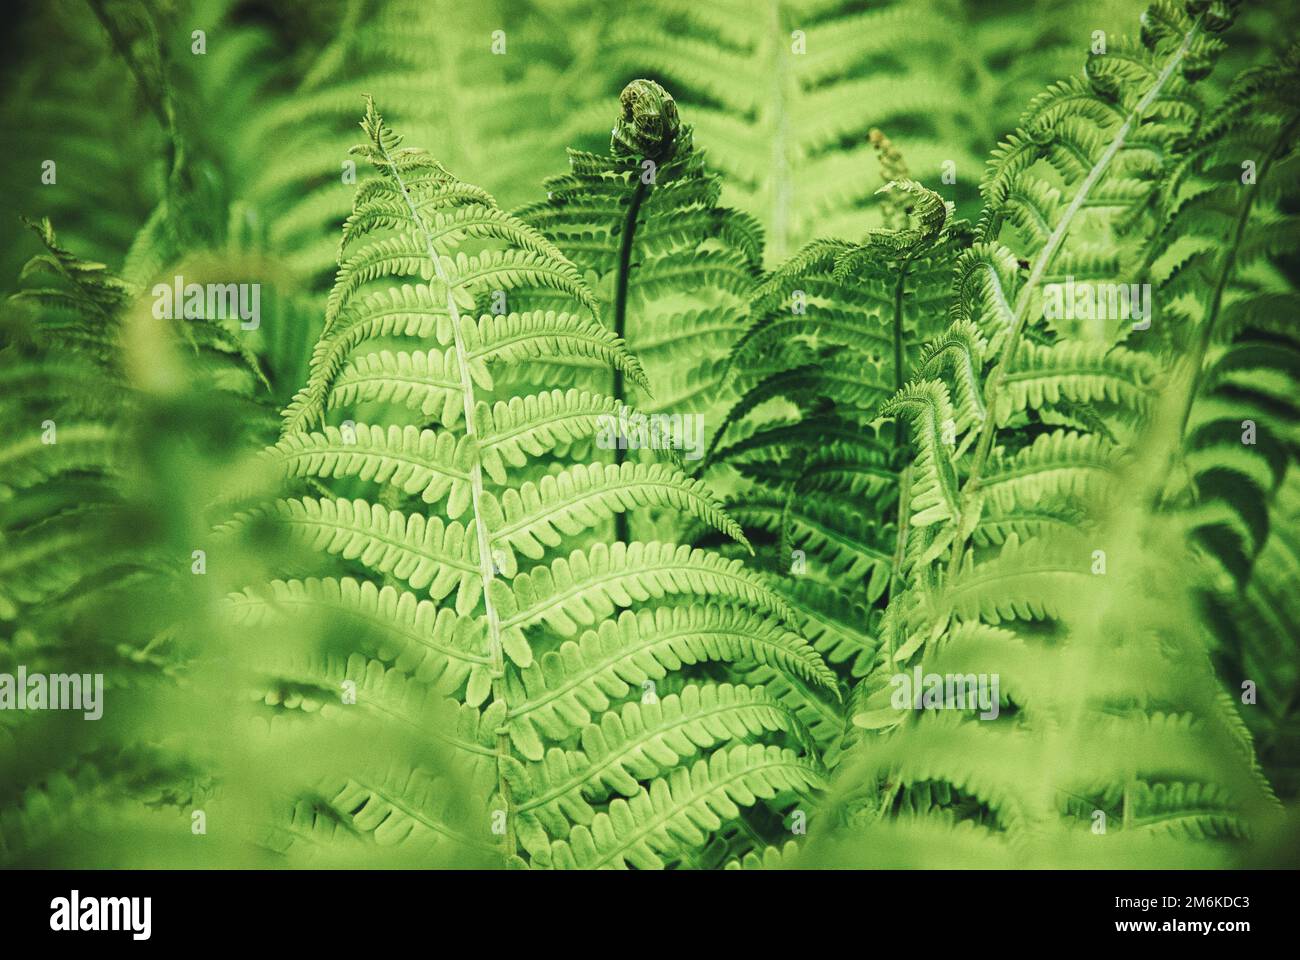 Fern growing in spring forest, natural background on green fern leaves Stock Photo